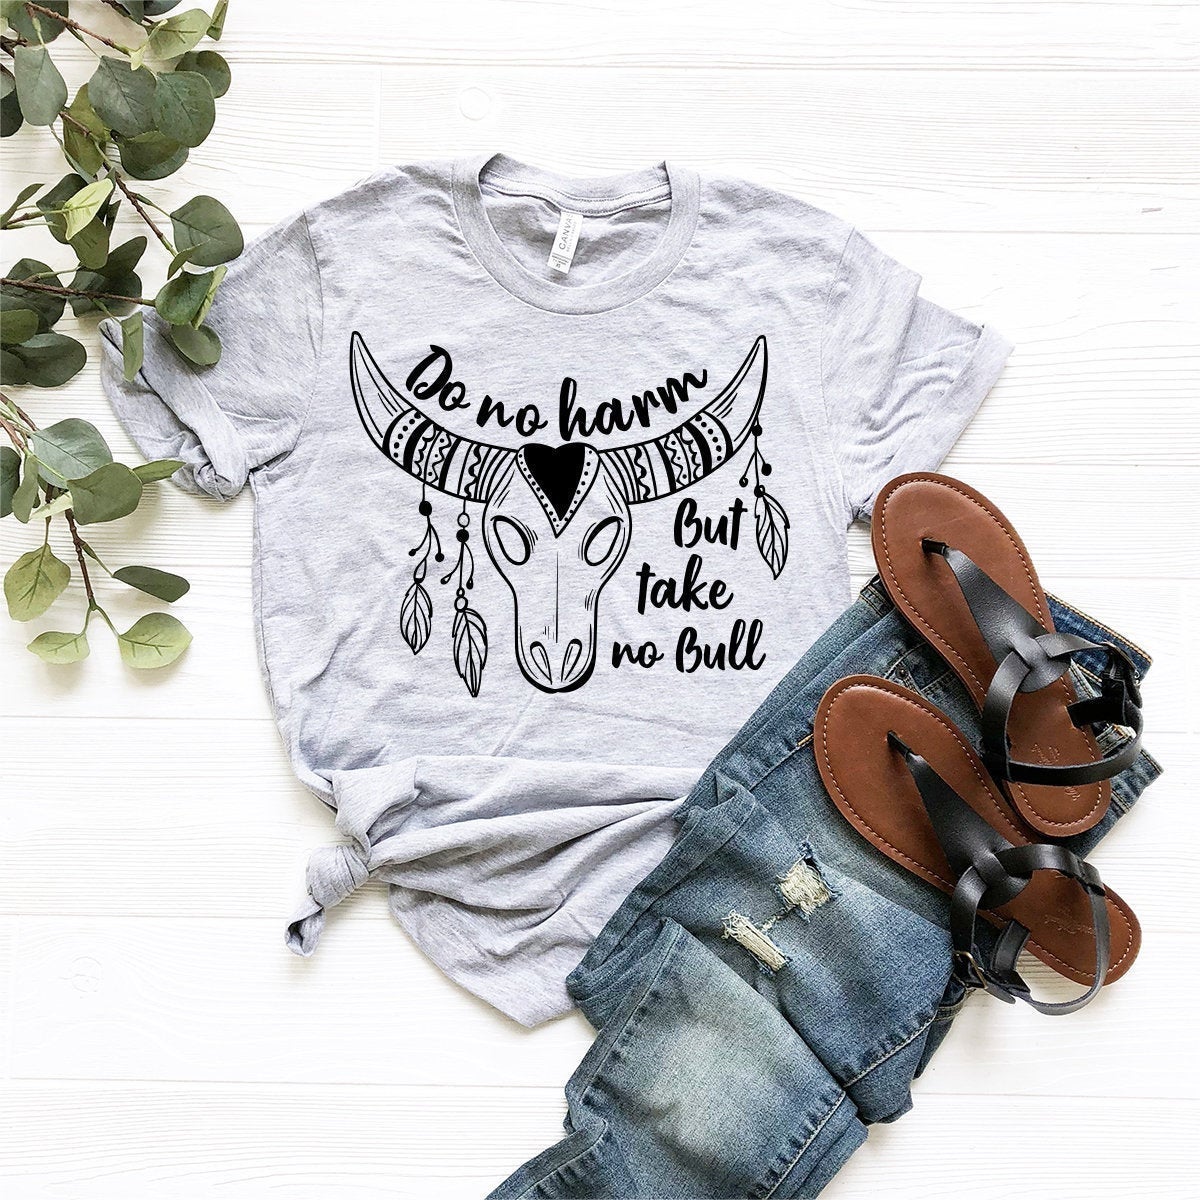 Western Graphic Tee, Country Girl Shirt, Do No Harm But Take No